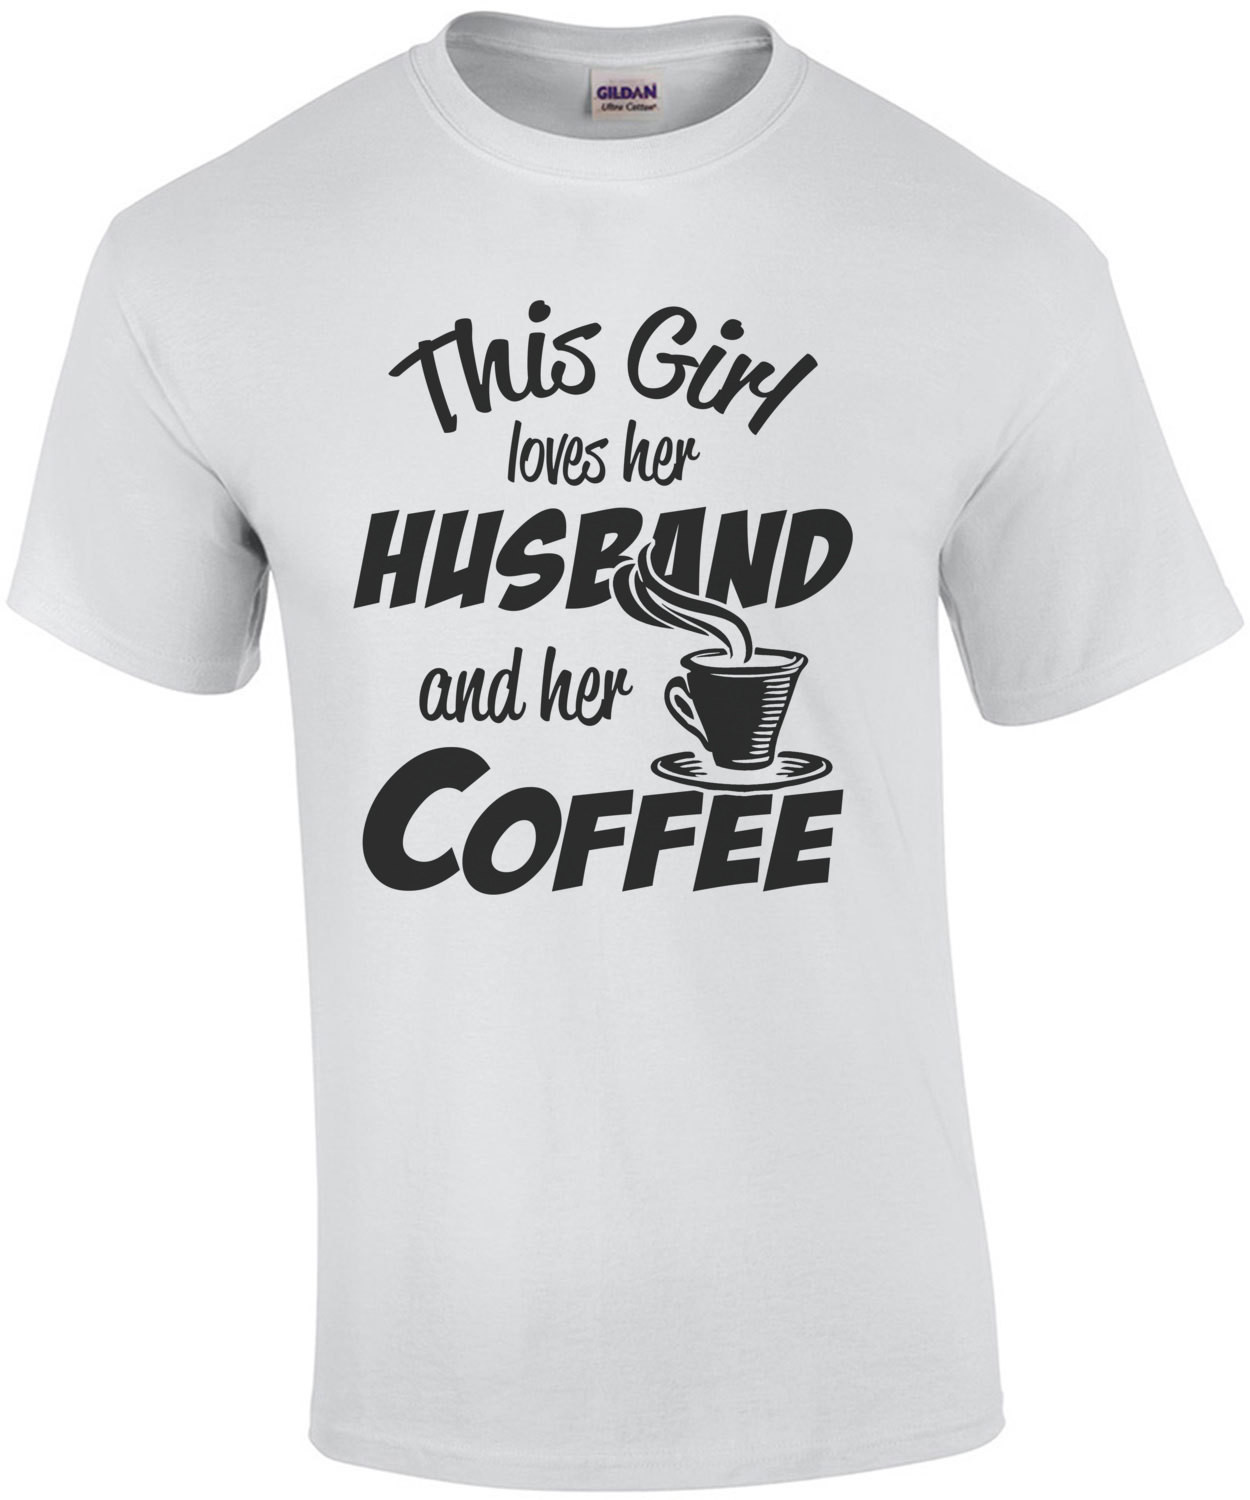 This Girl Loves Her Husband And Her Coffee T-Shirt